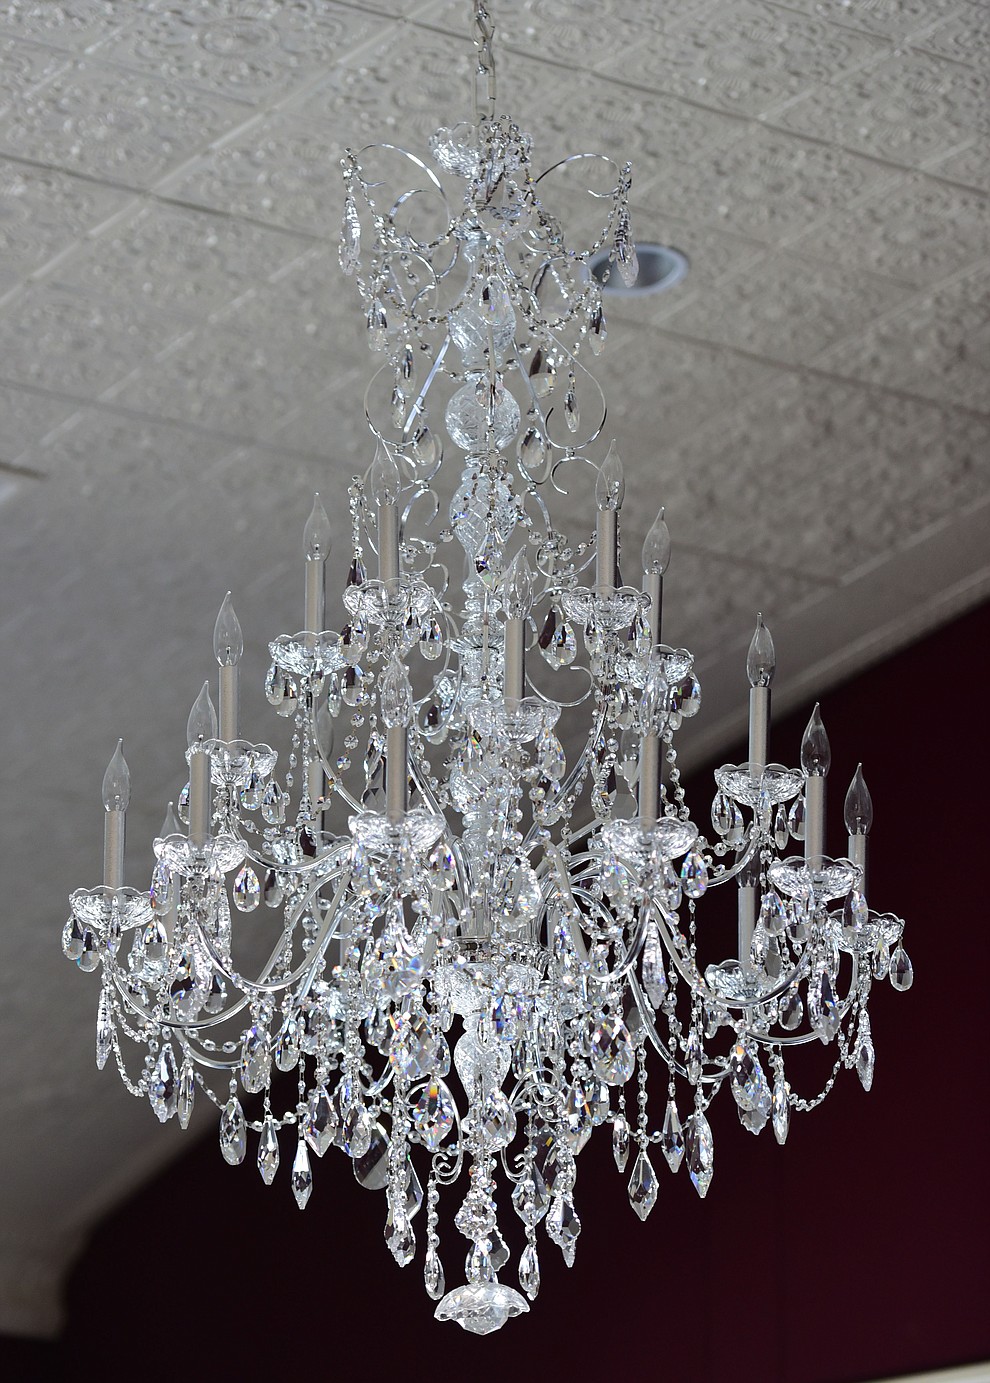 The chandelier in the main third floor ballroom as the renovations for the Elks Opera House have been completed.